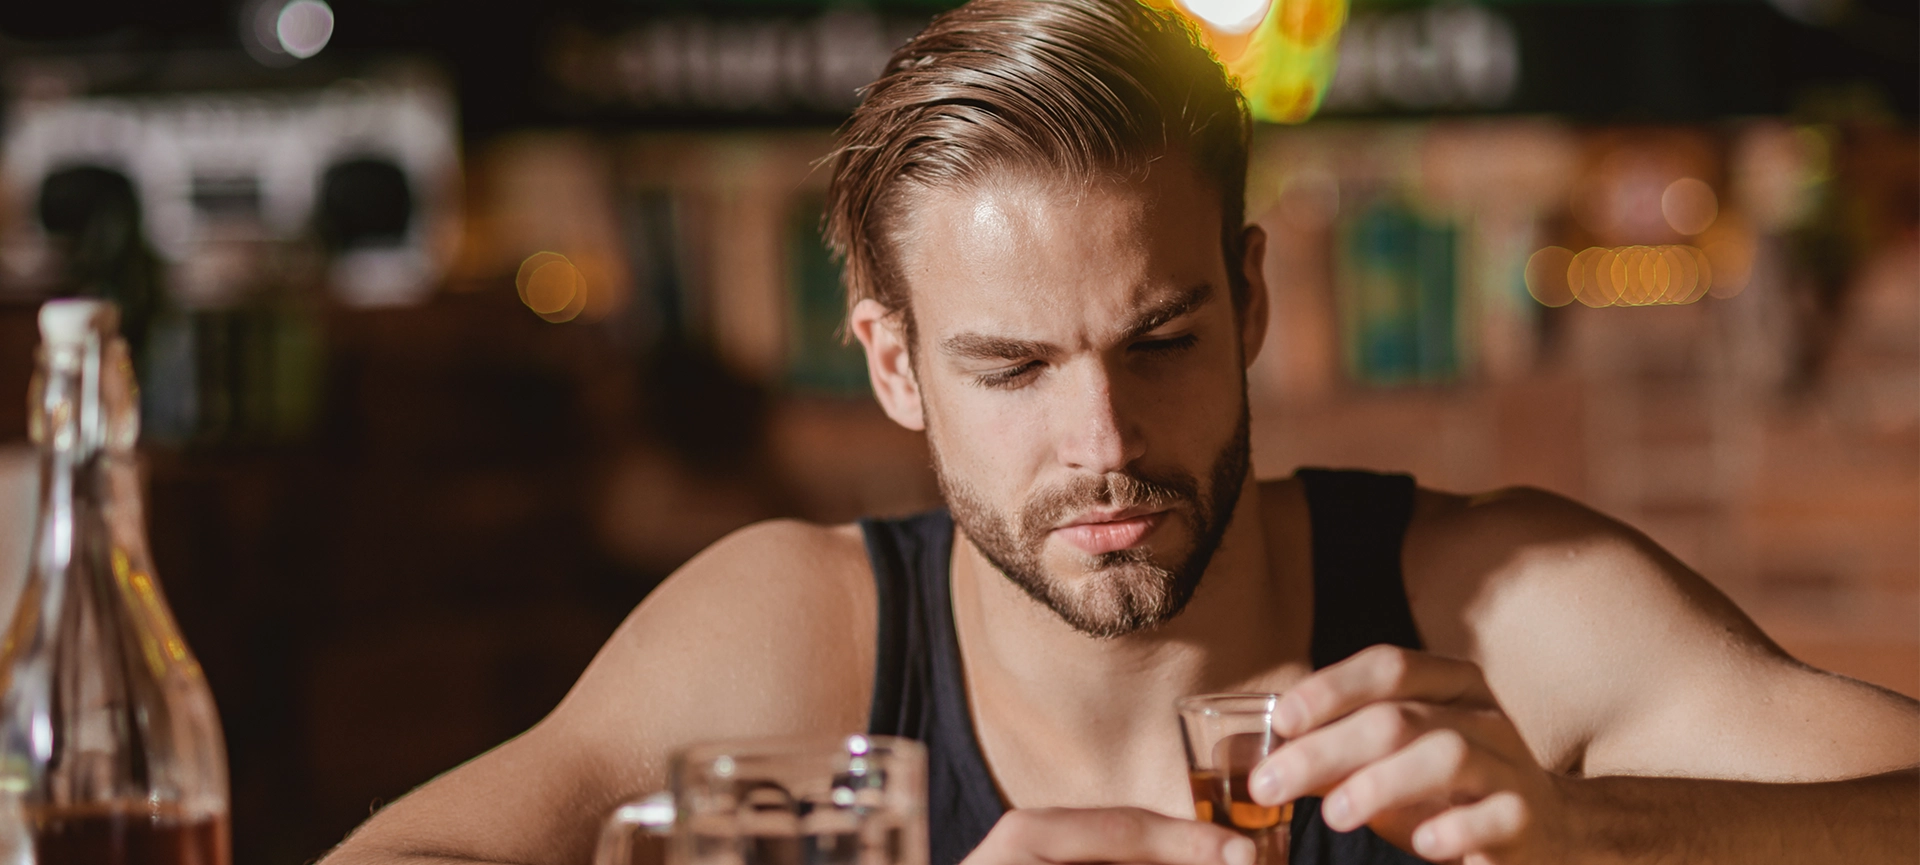 alcohol addiction and the community